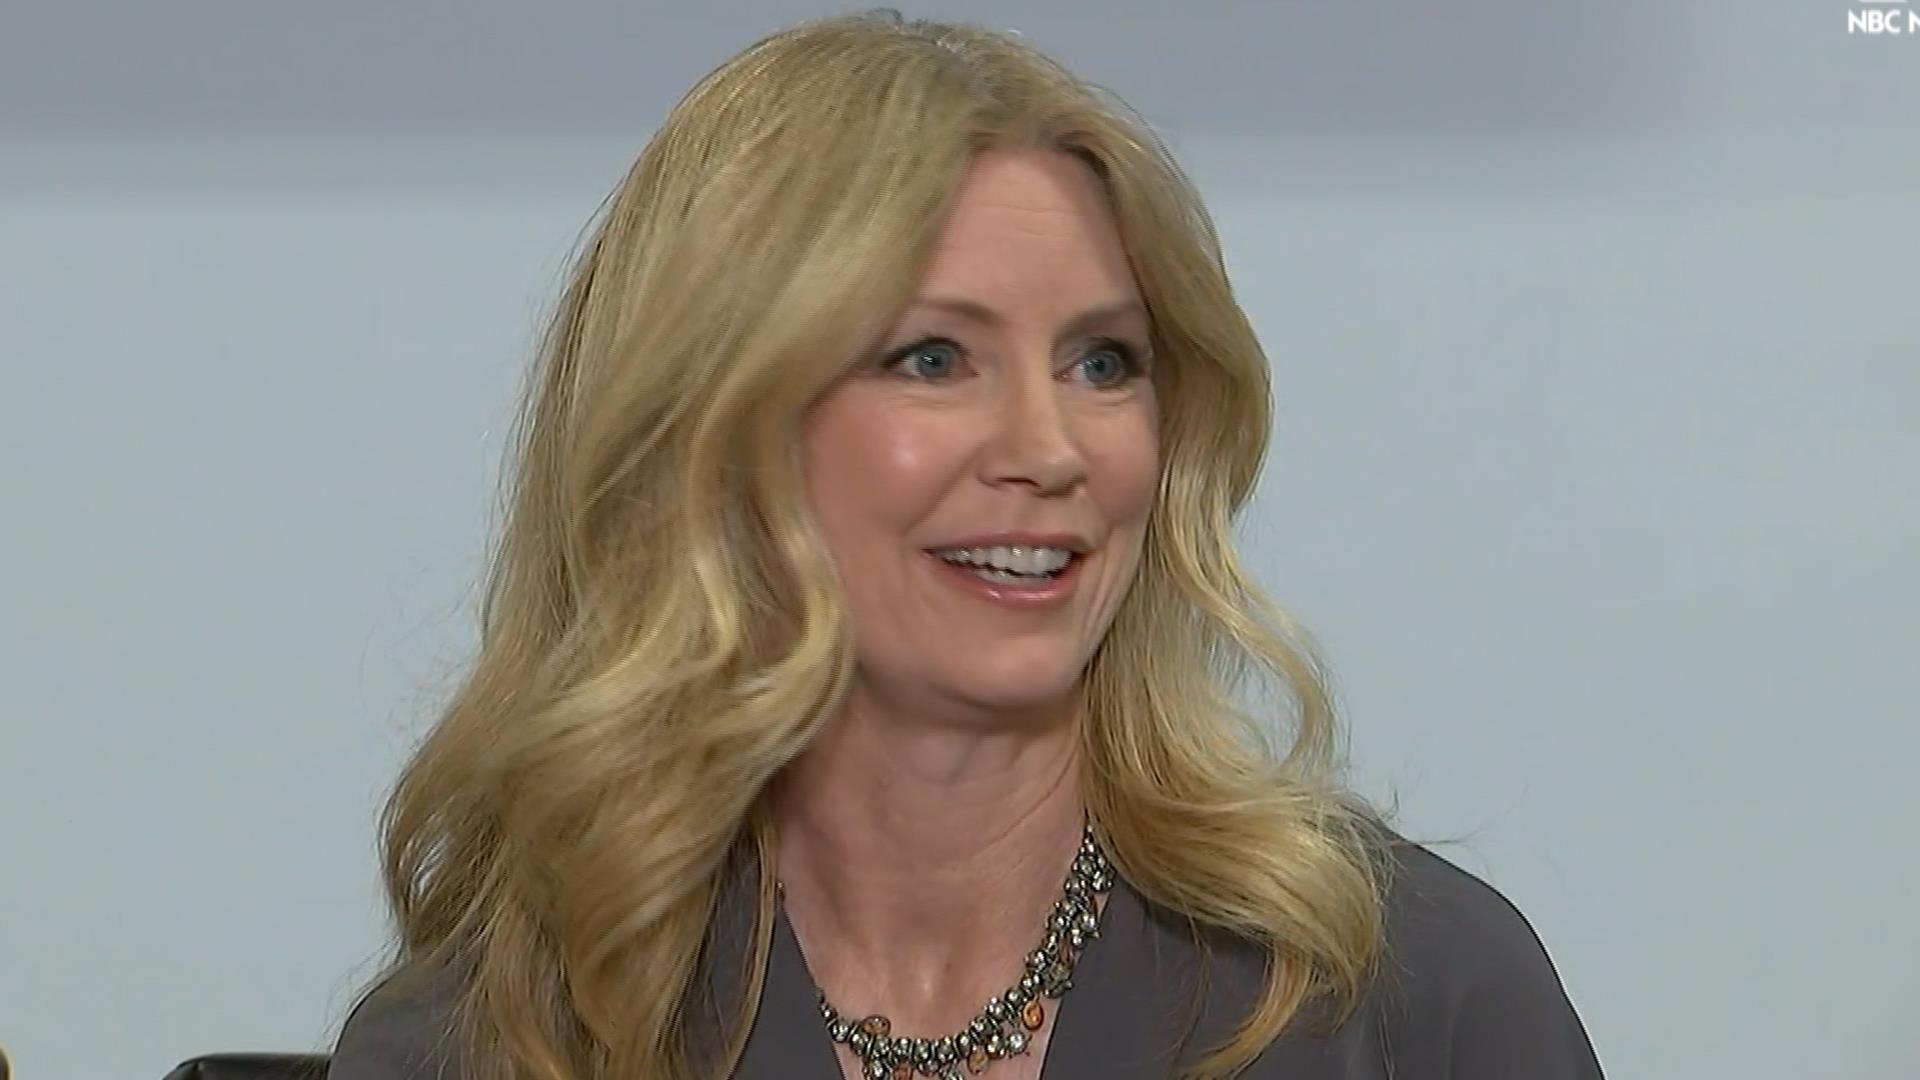 Wendy Walsh Speaks About Bill O'Reilly Harassment Allegations - NBC News1920 x 1080